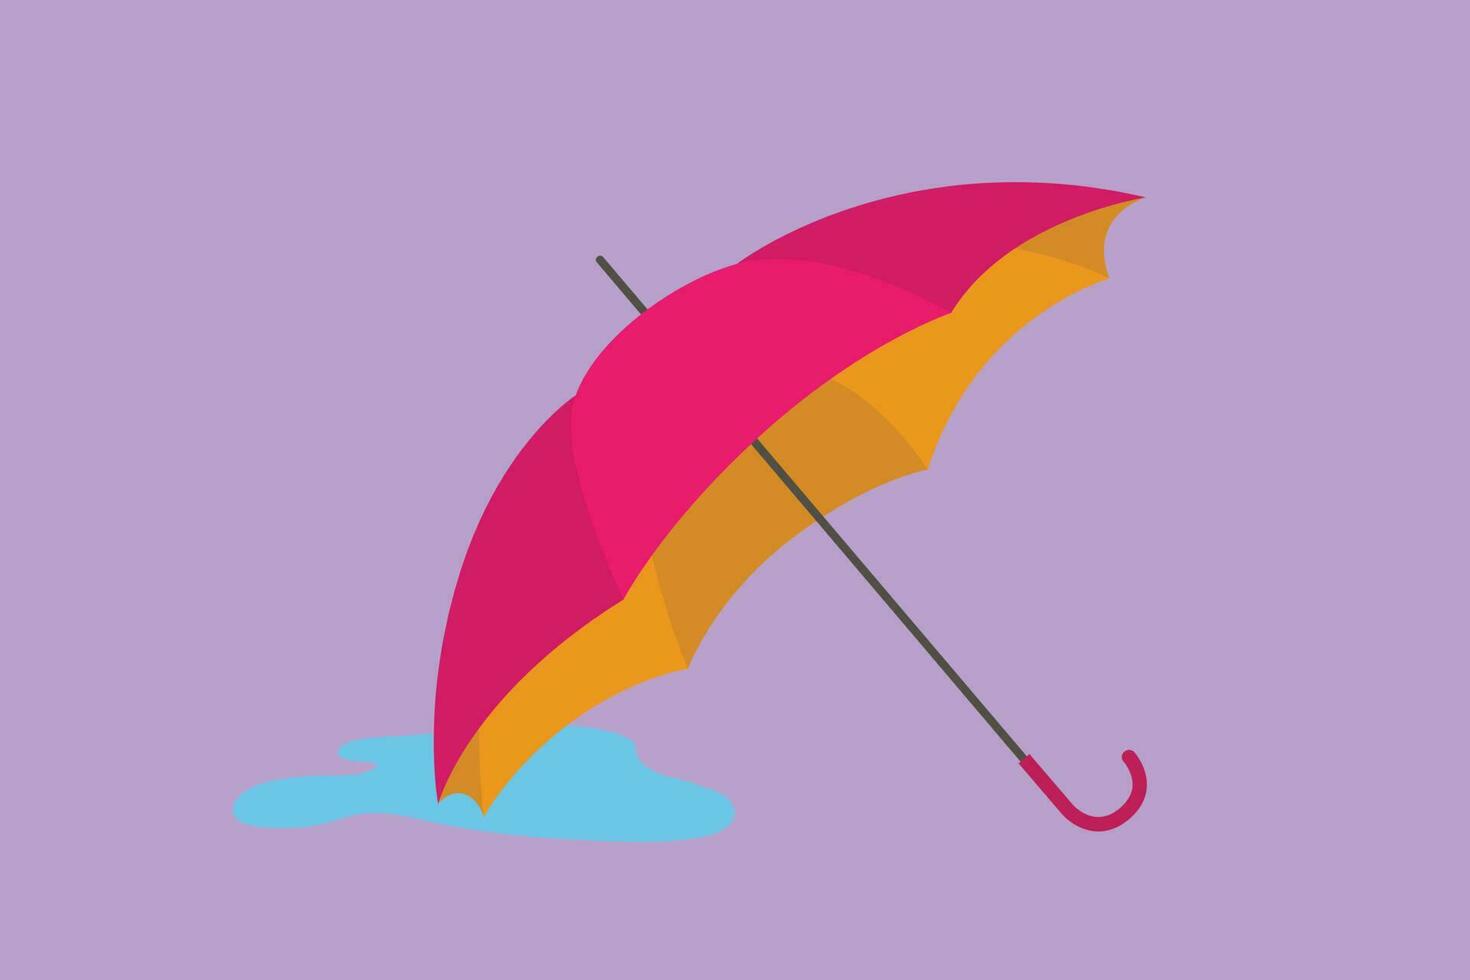 Cartoon flat style drawing of stylized umbrella icon symbol template. Summer or fall fashion accessory. Autumn weather forecast logo. Rain protection safety concept. Graphic design vector illustration